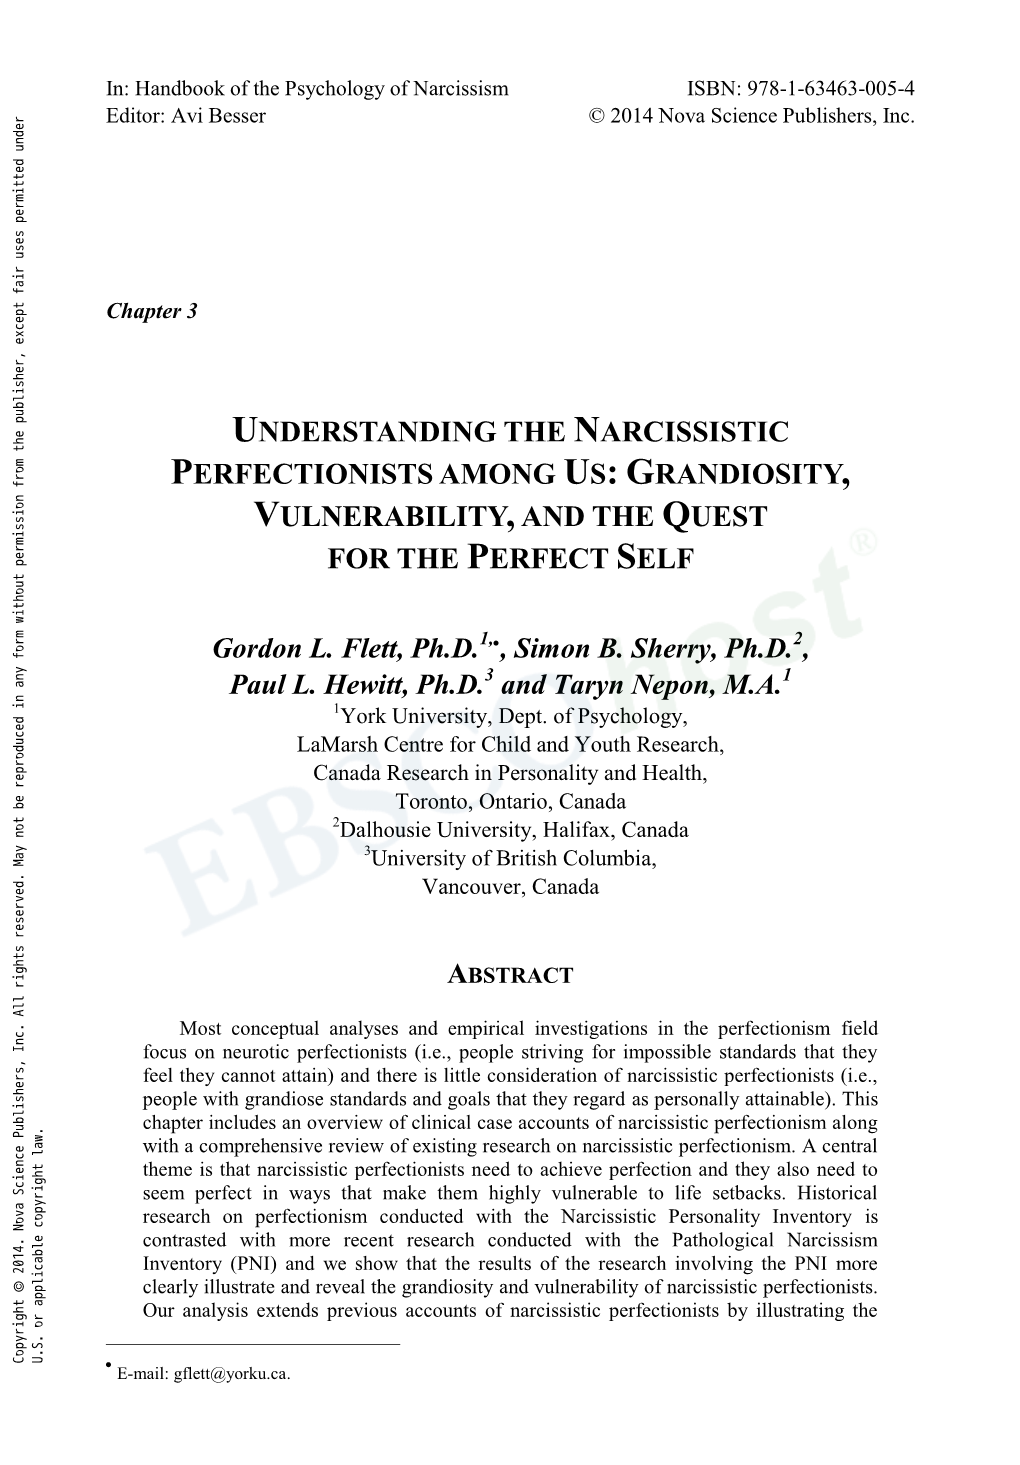 Understanding the Narcissistic Perfectionists Among Us: Grandiosity, Vulnerability, and the Quest for the Perfect Self